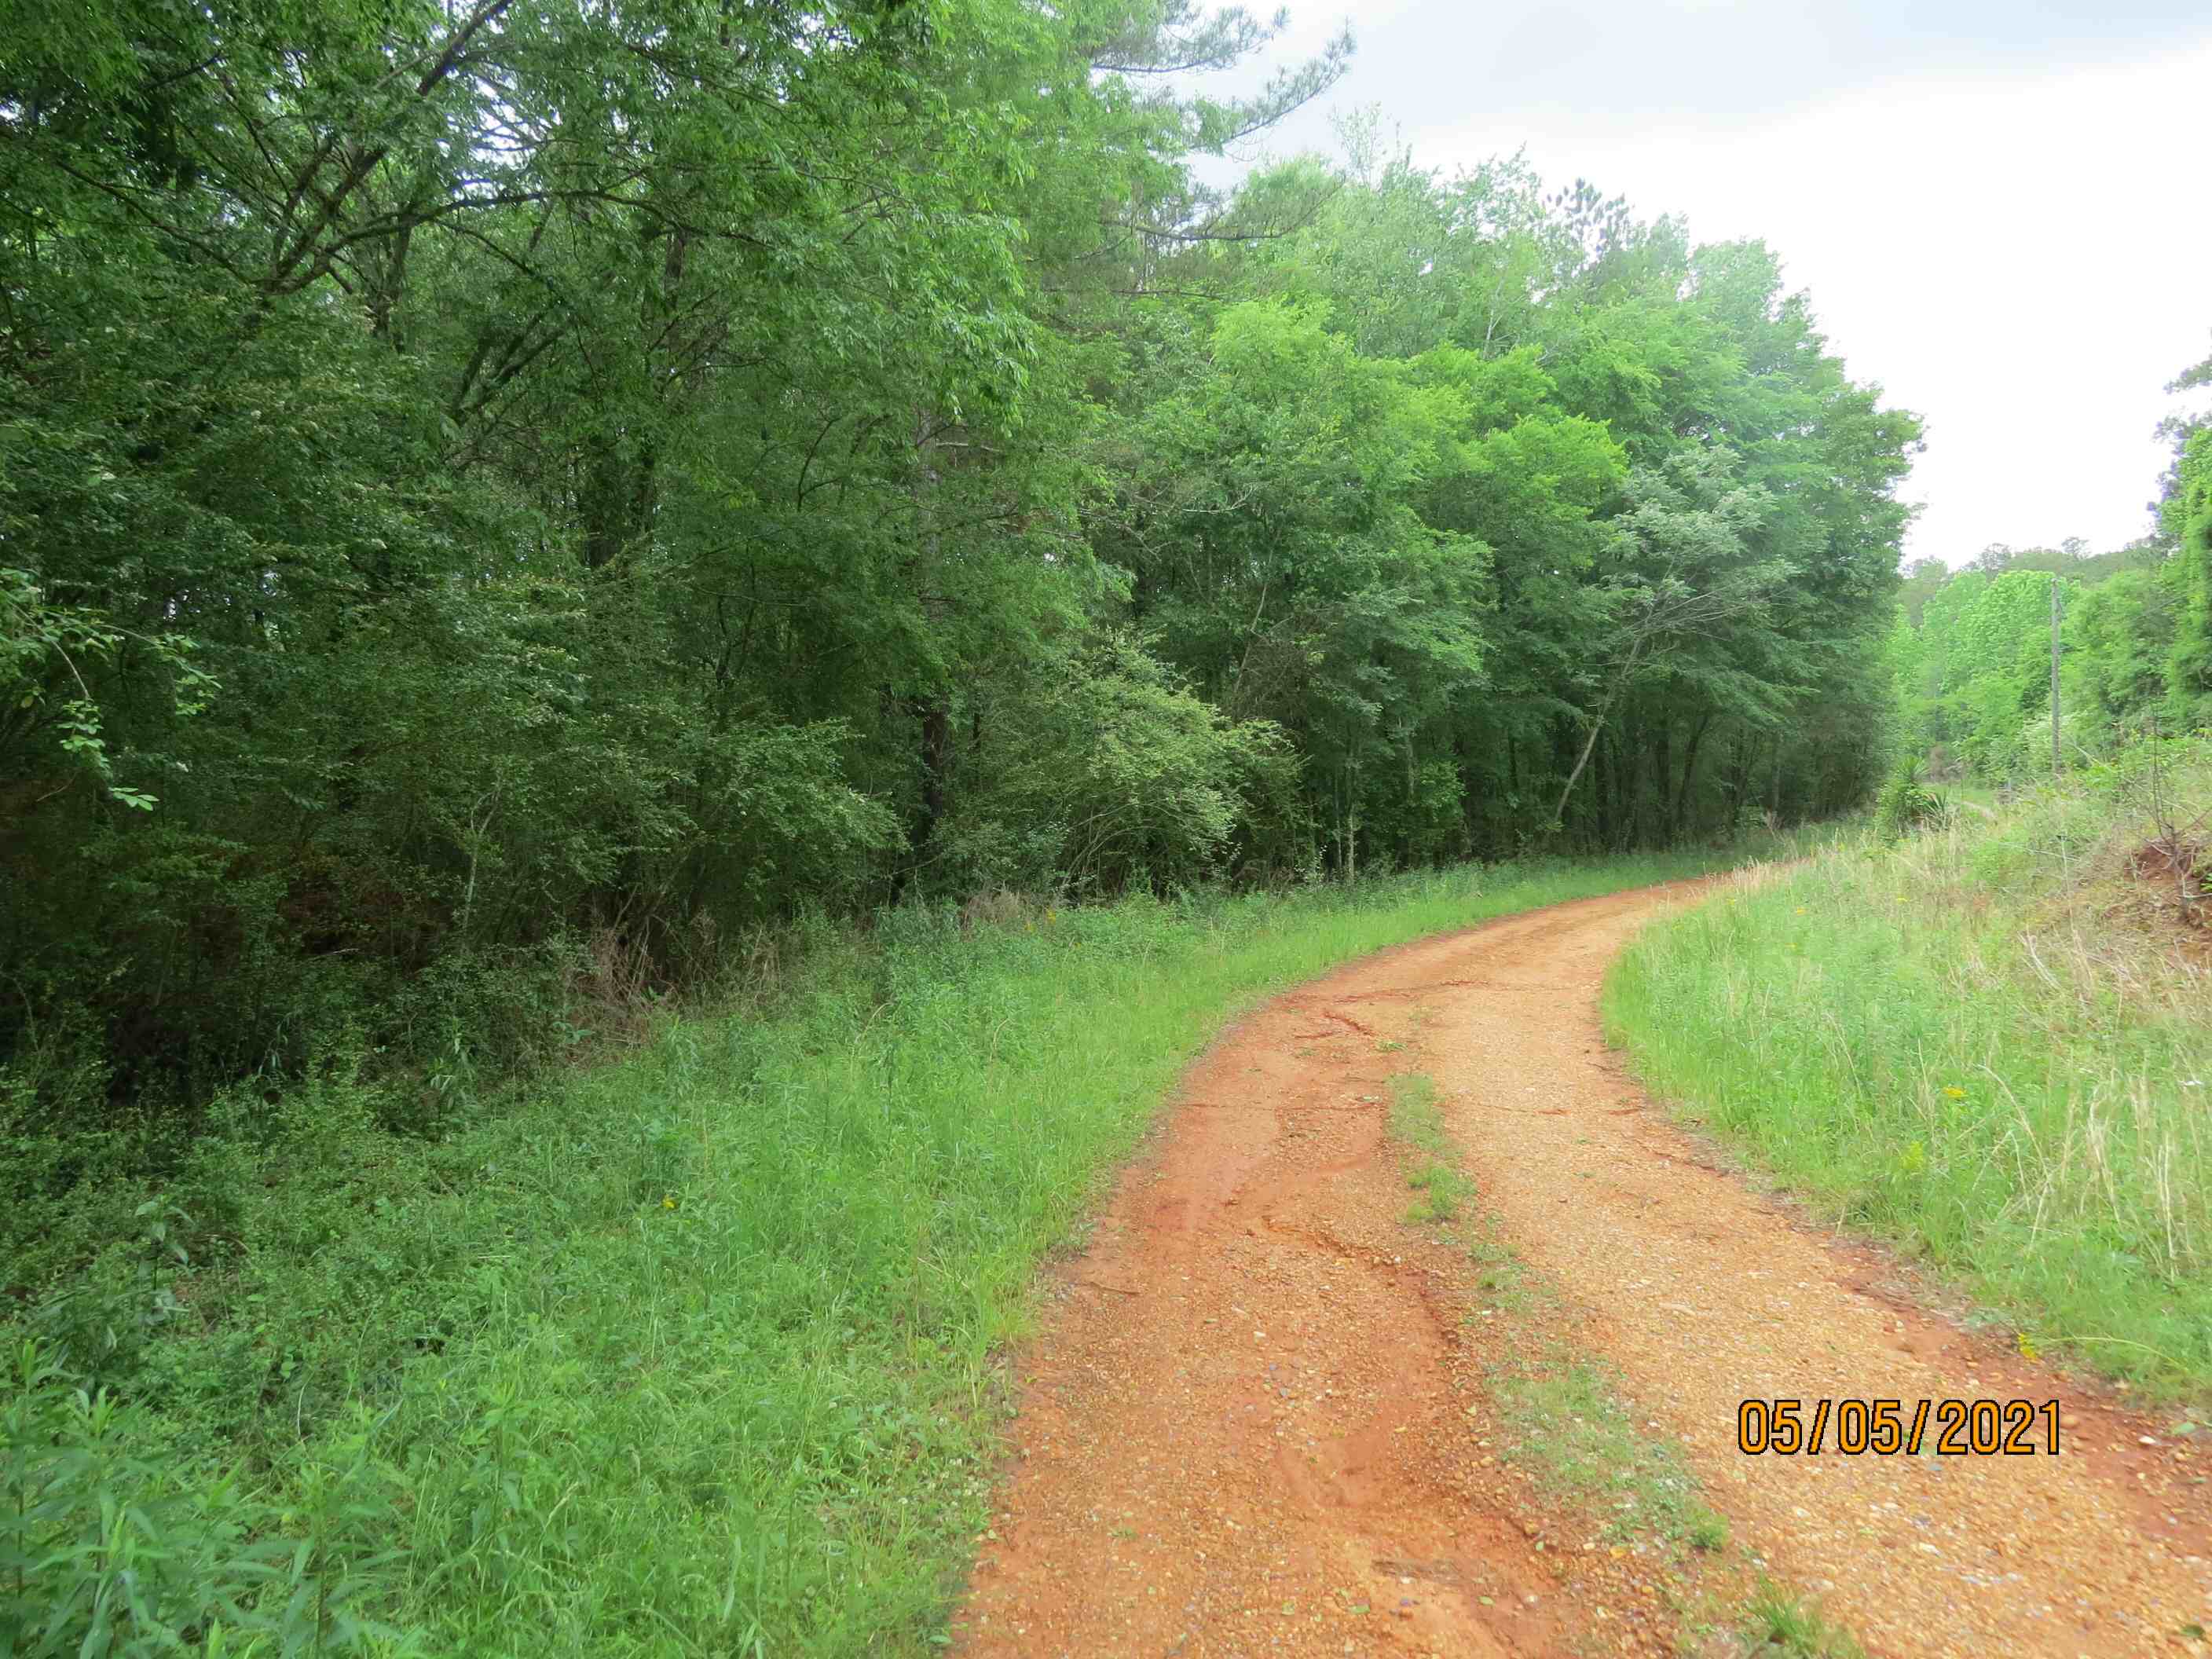 The property has about 4,000 feet on this unpaved county road